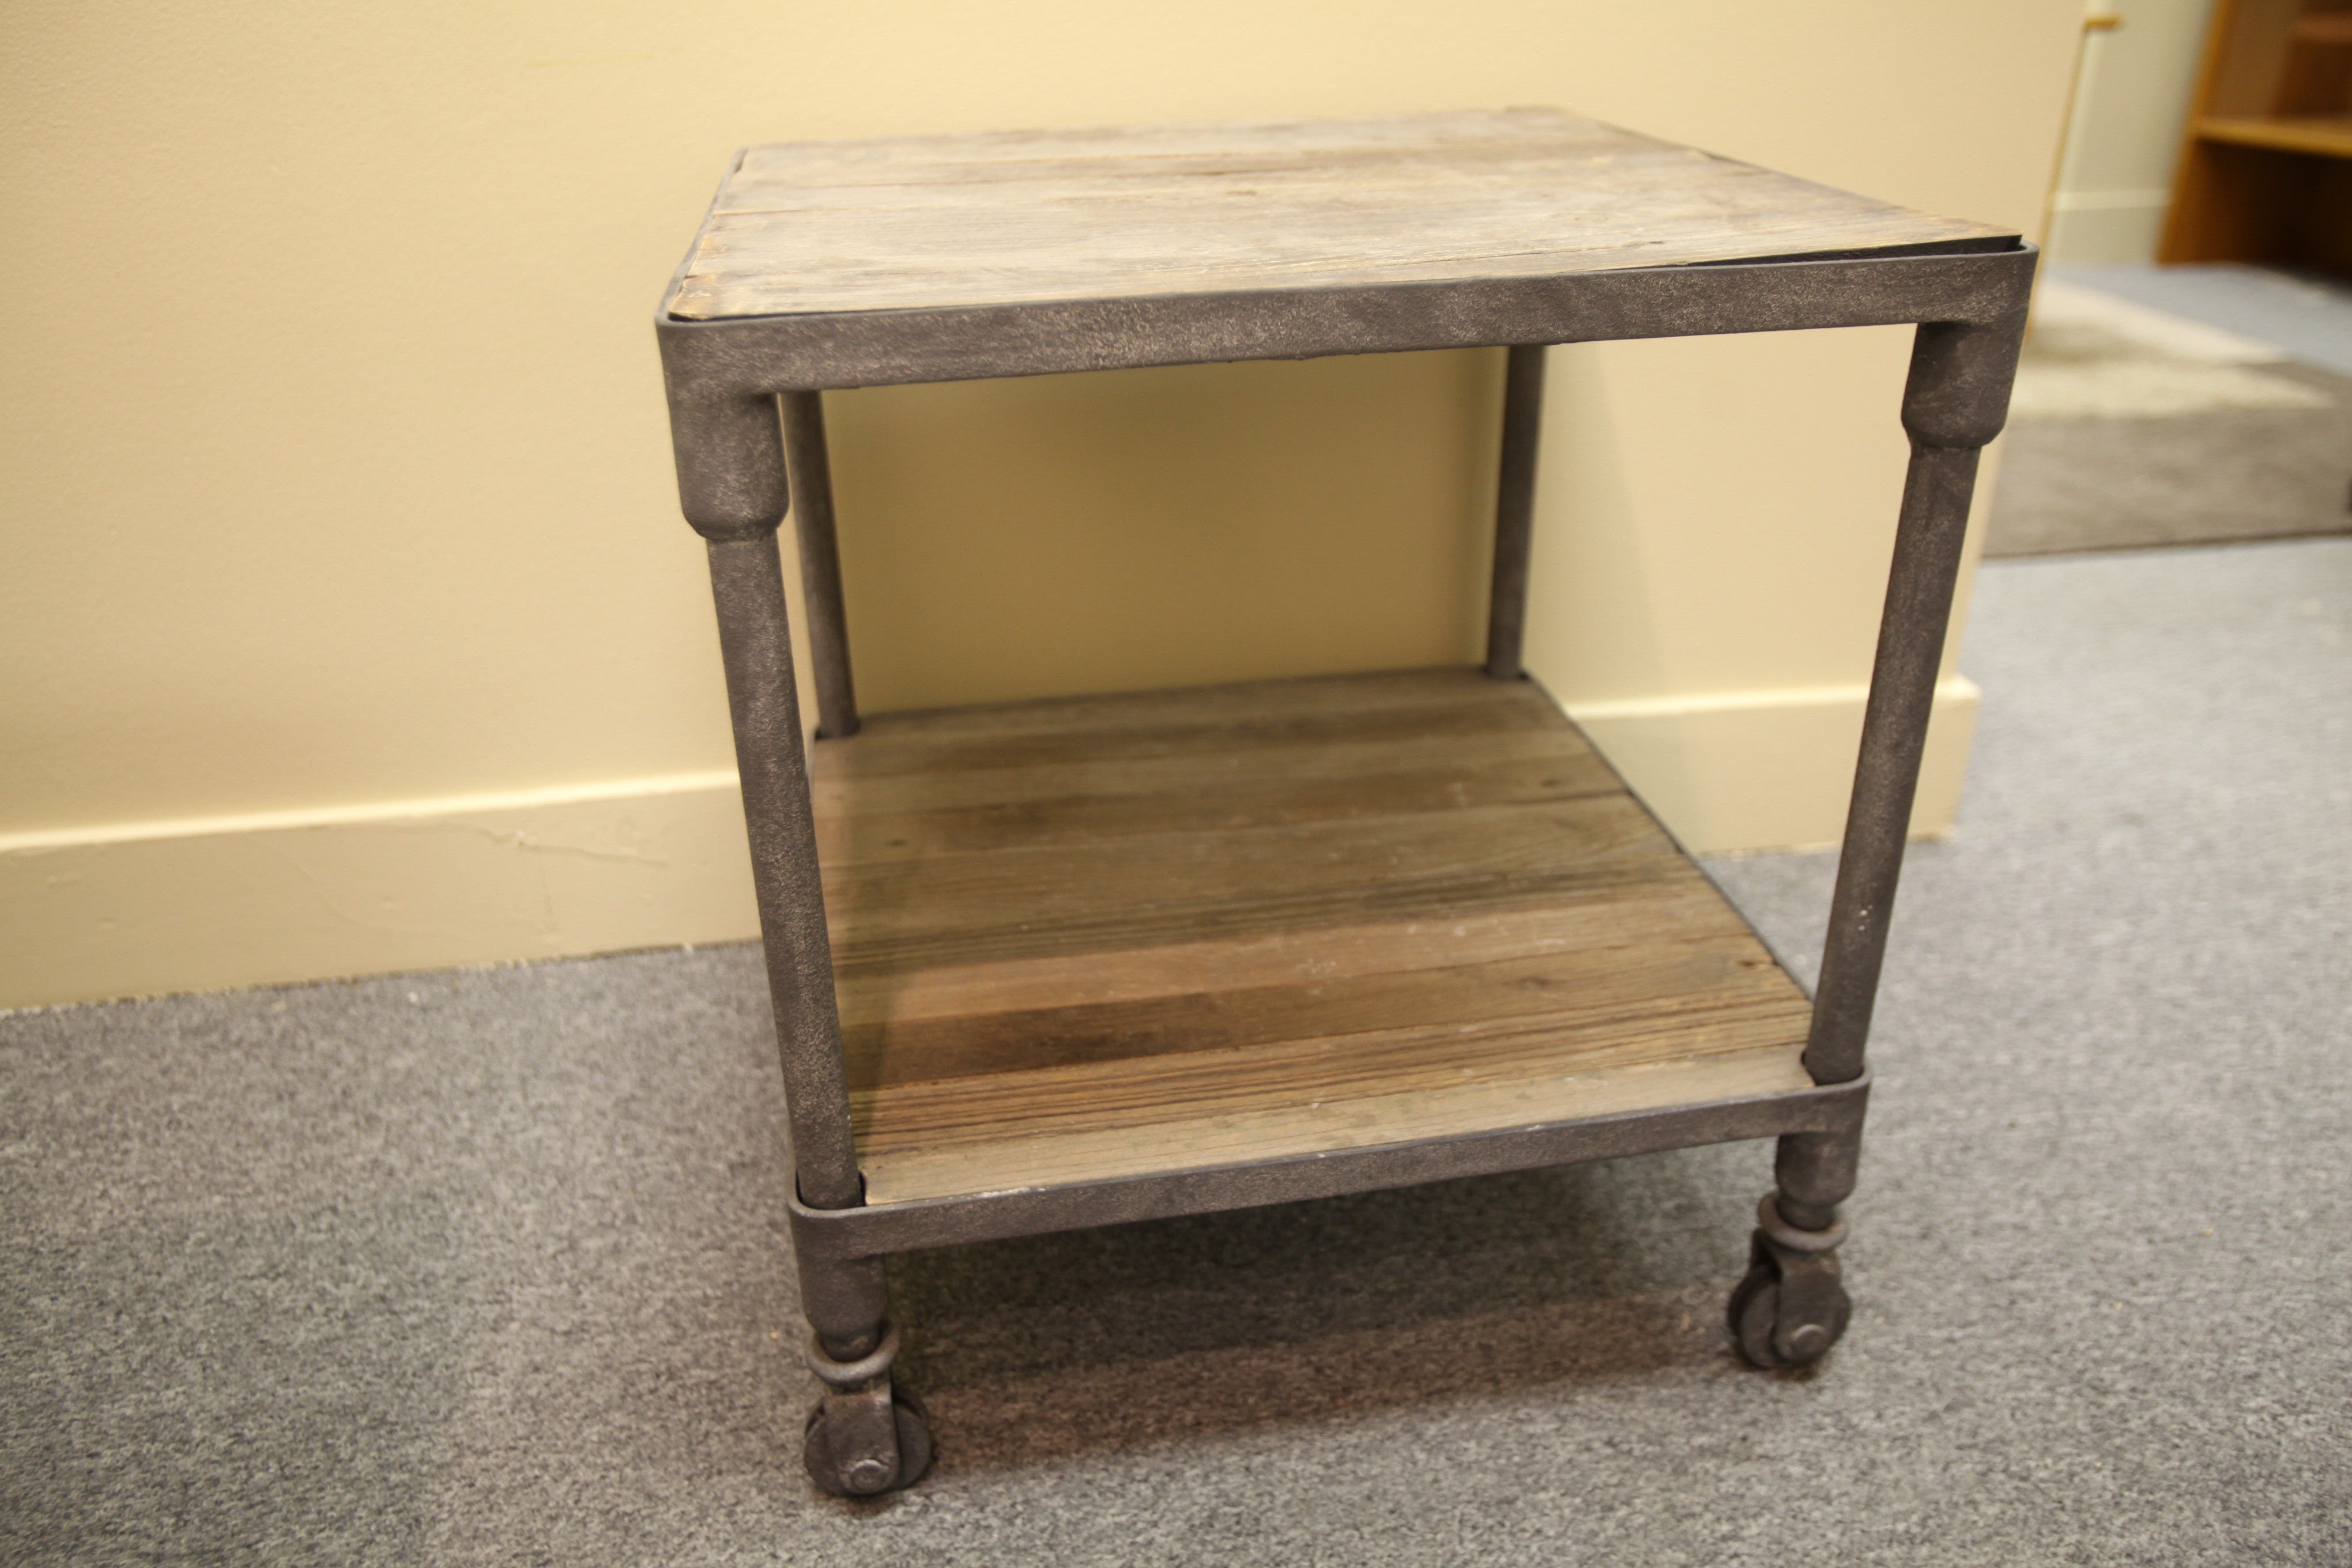 Restoration Hardware Reclaimed/Rust Side Table (20"x20"x22"h)